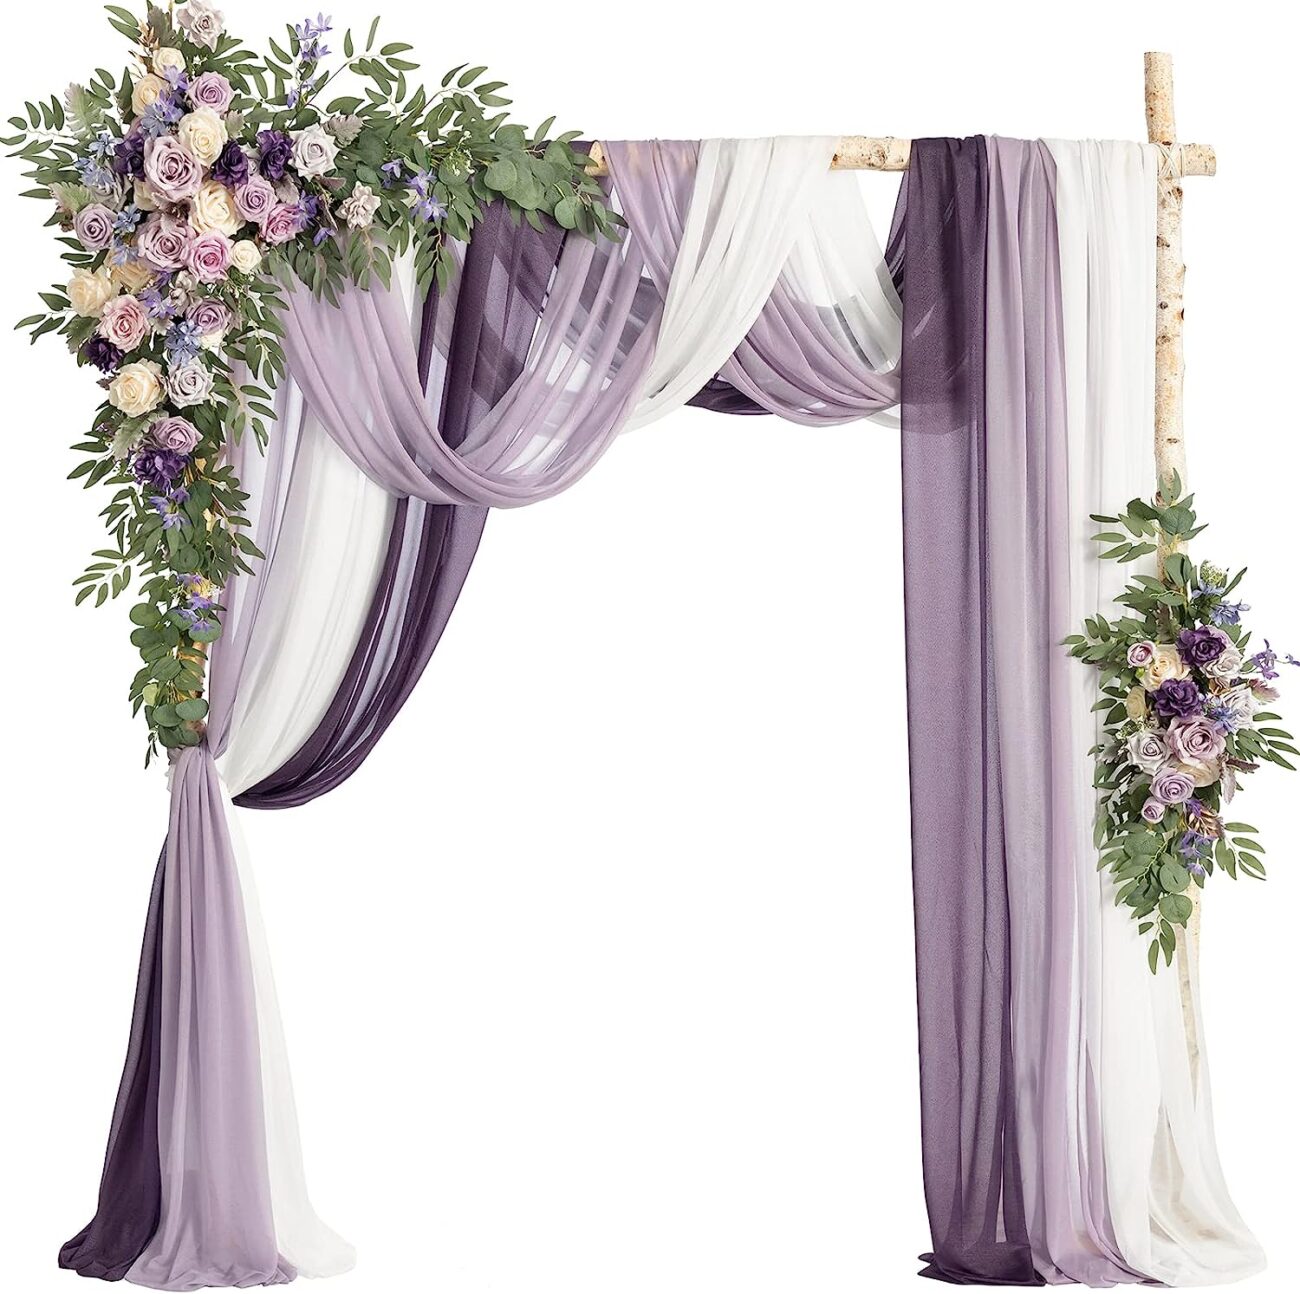 Wedding Arch Draping Fabric for Rustic Wedding Shower Decorations